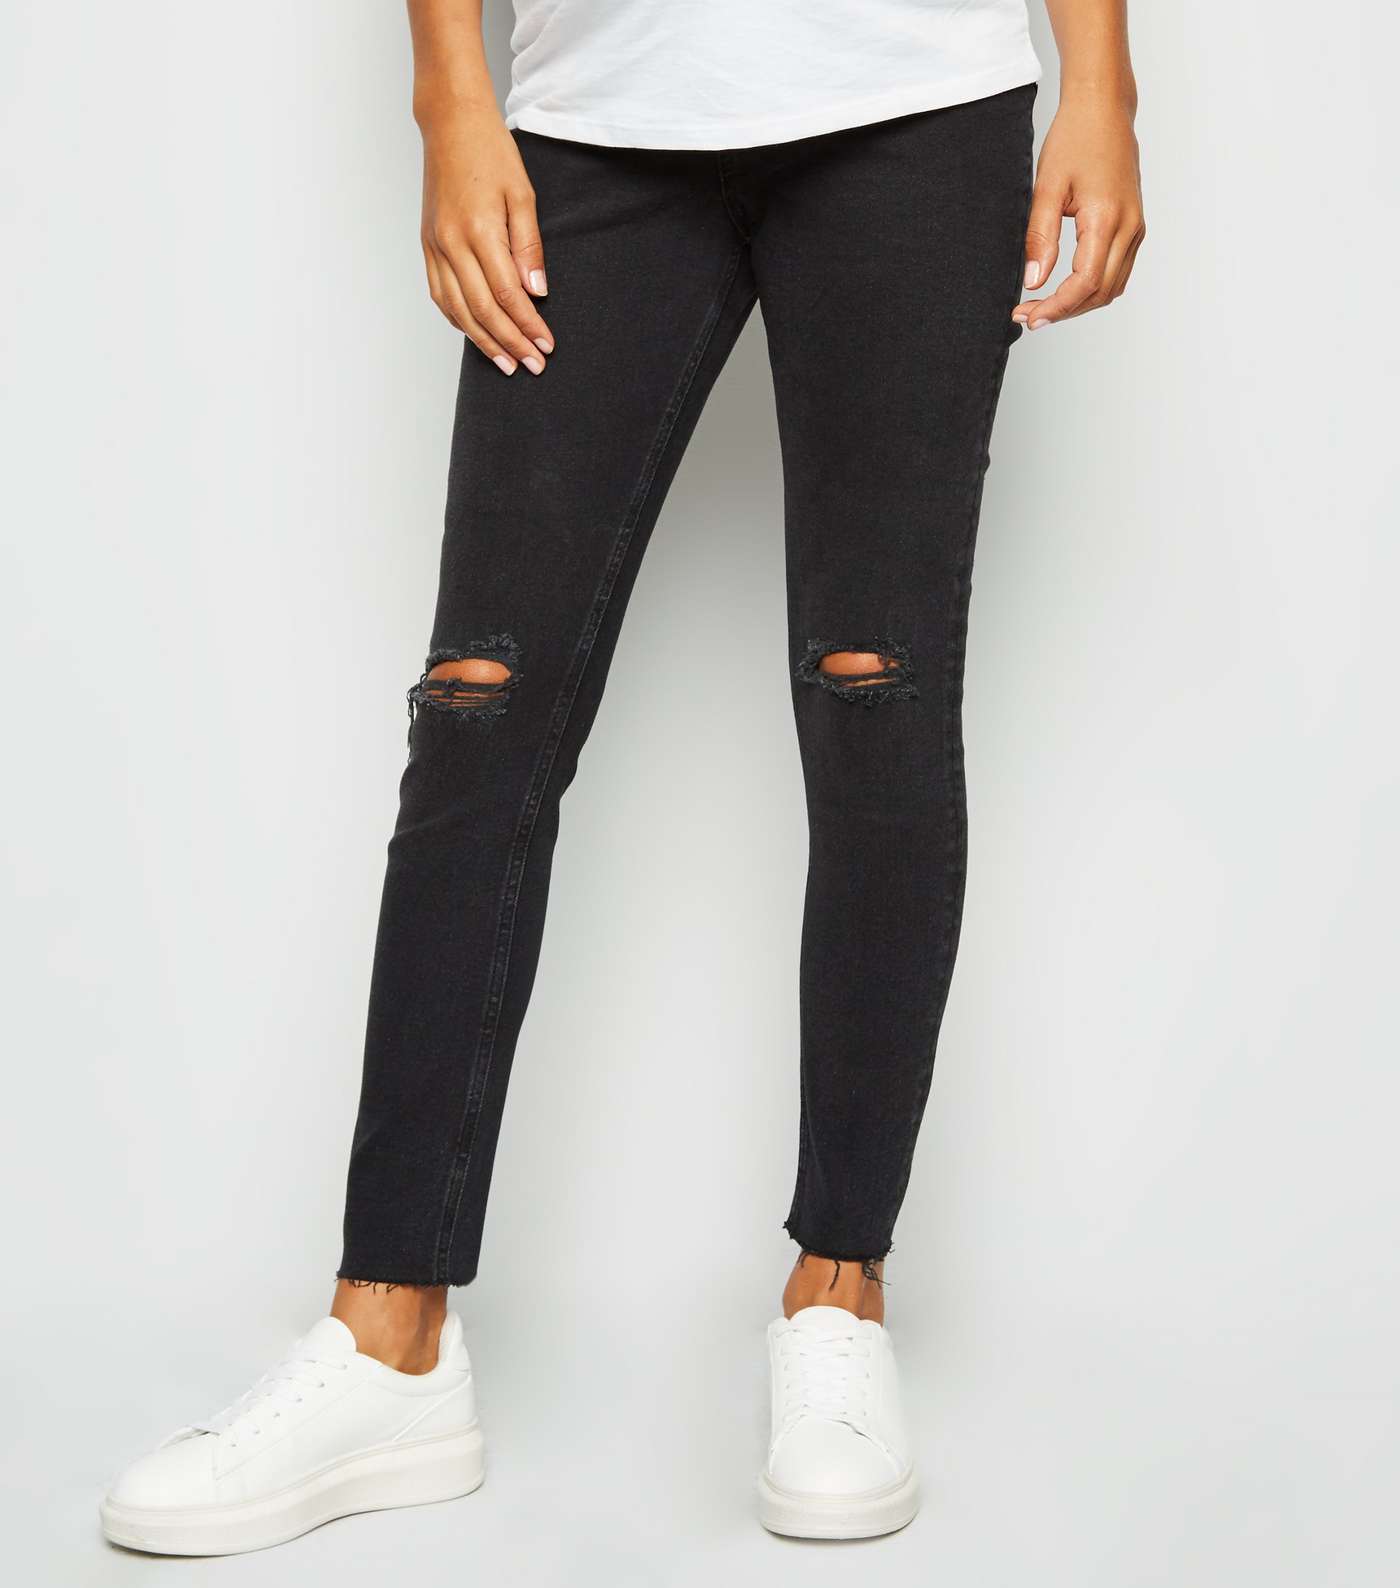 Maternity Black Ripped Knee Under Bump Skinny Jeans Image 2